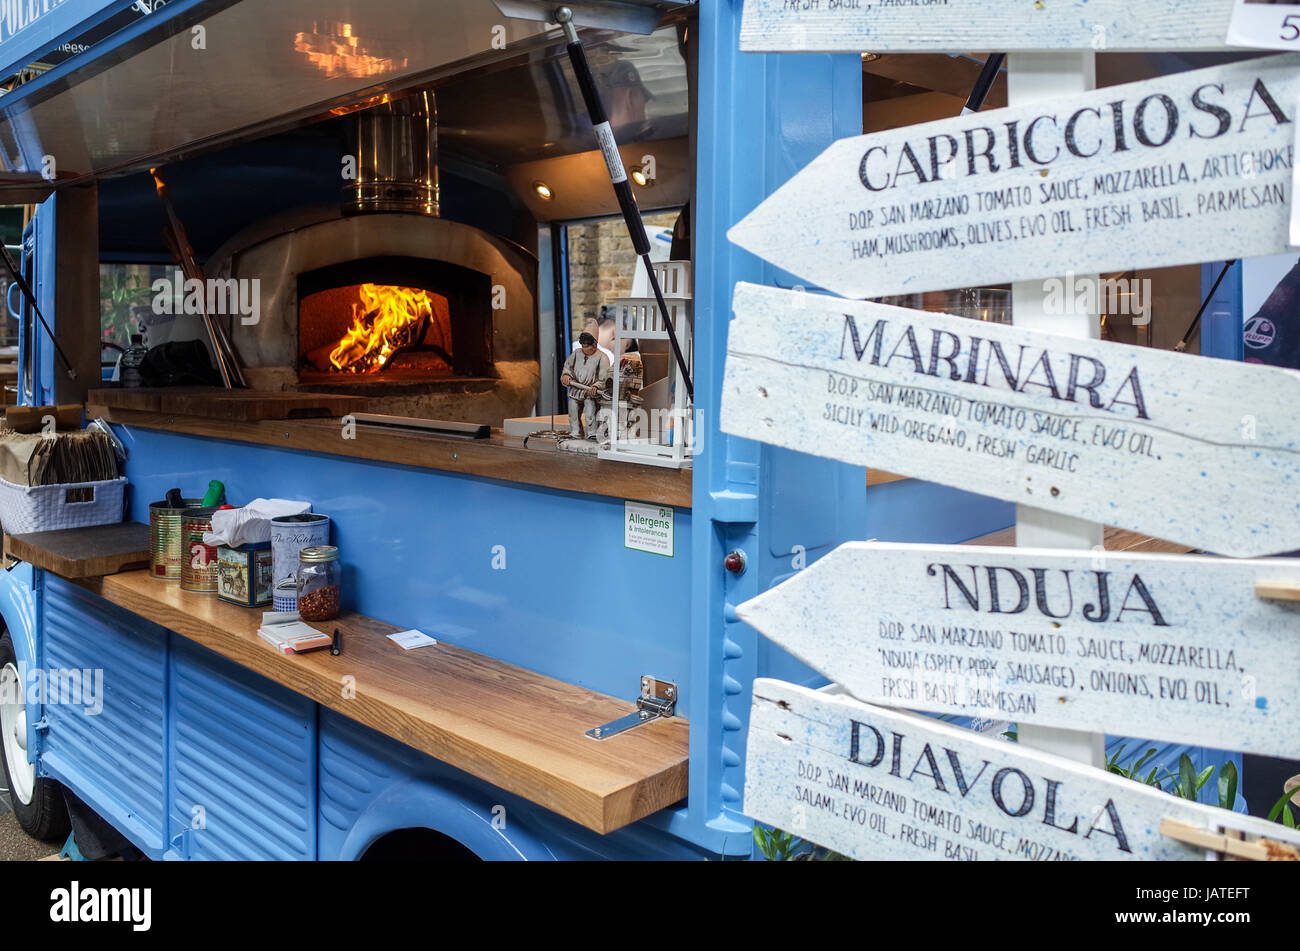 A mobile Pizza van fires up the oven in London's Spitalfields market ready for the lunchtime rush. London Street Food Pizza Van. Stock Photo